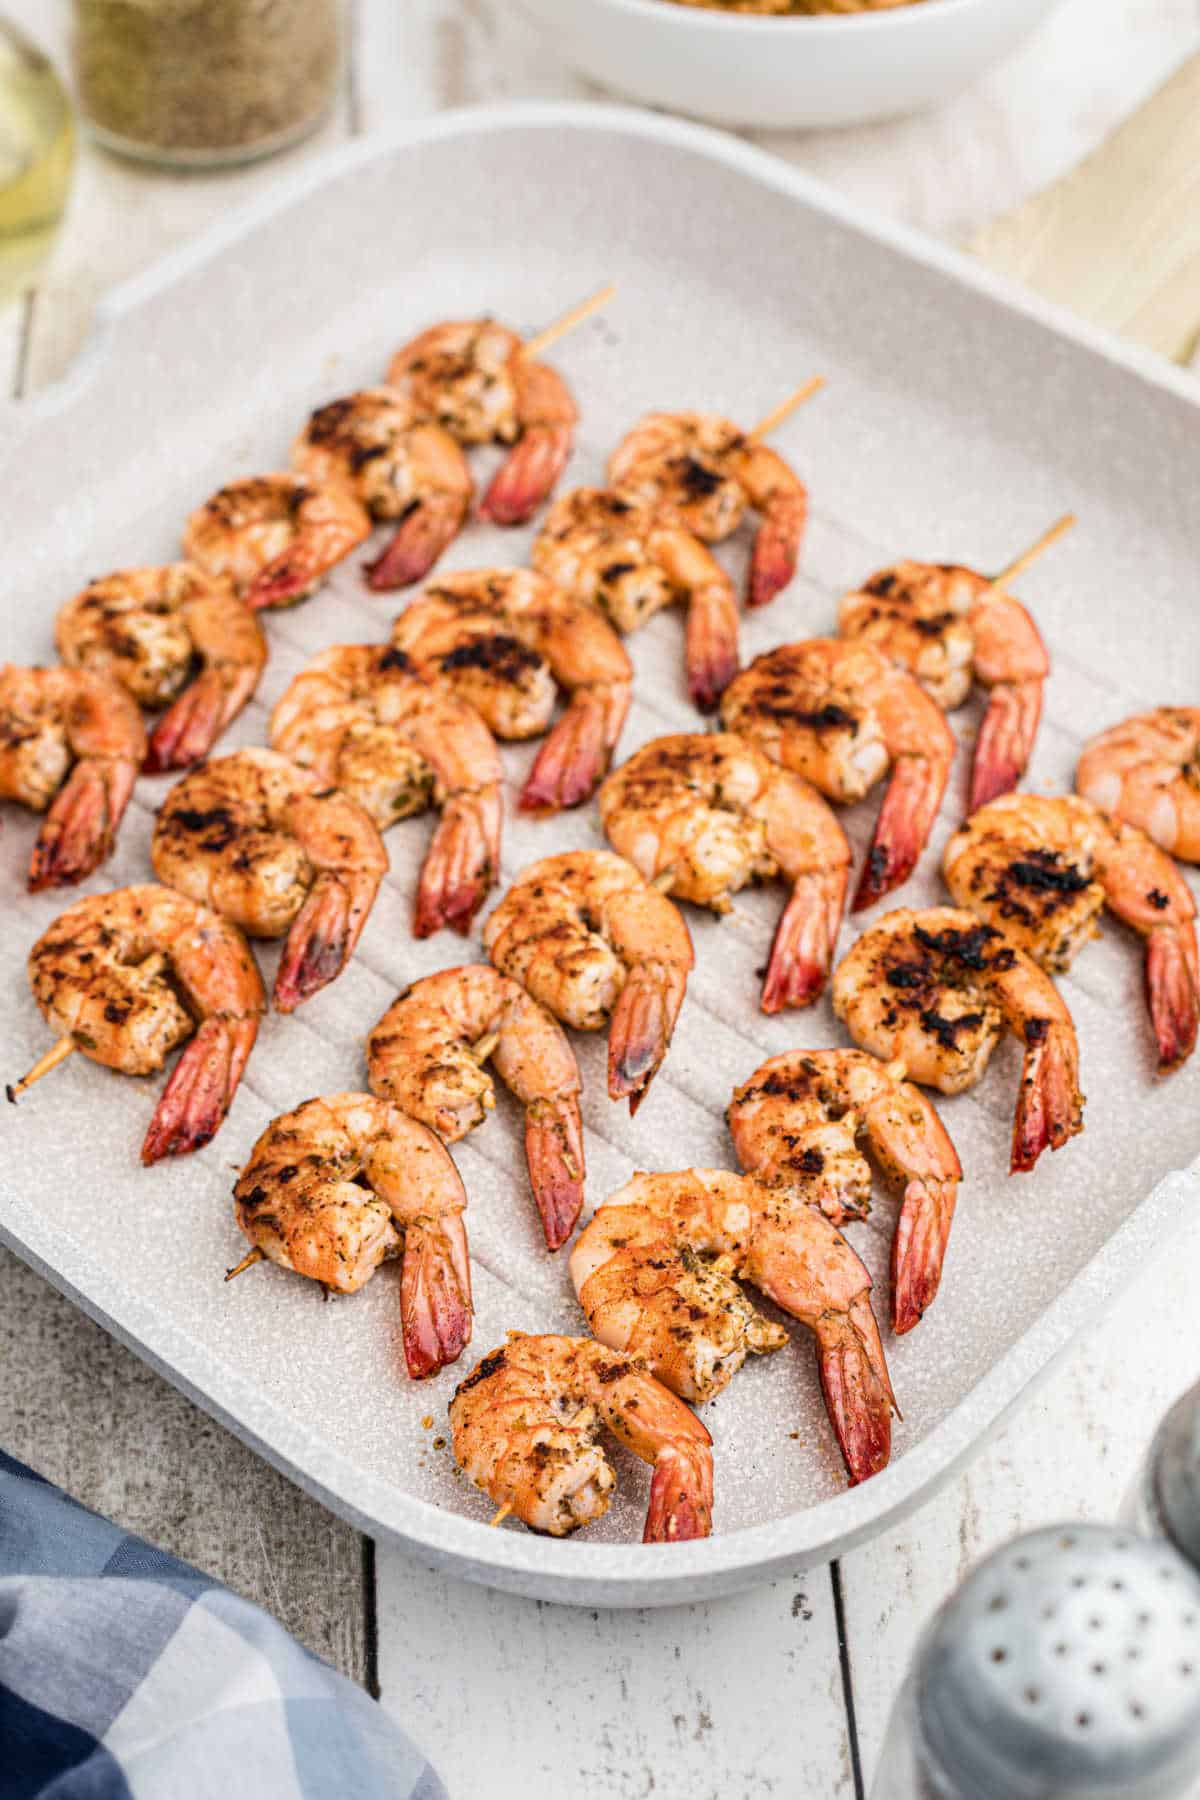 Texas roadhouse grilled shrimp being cooked in a grill pan